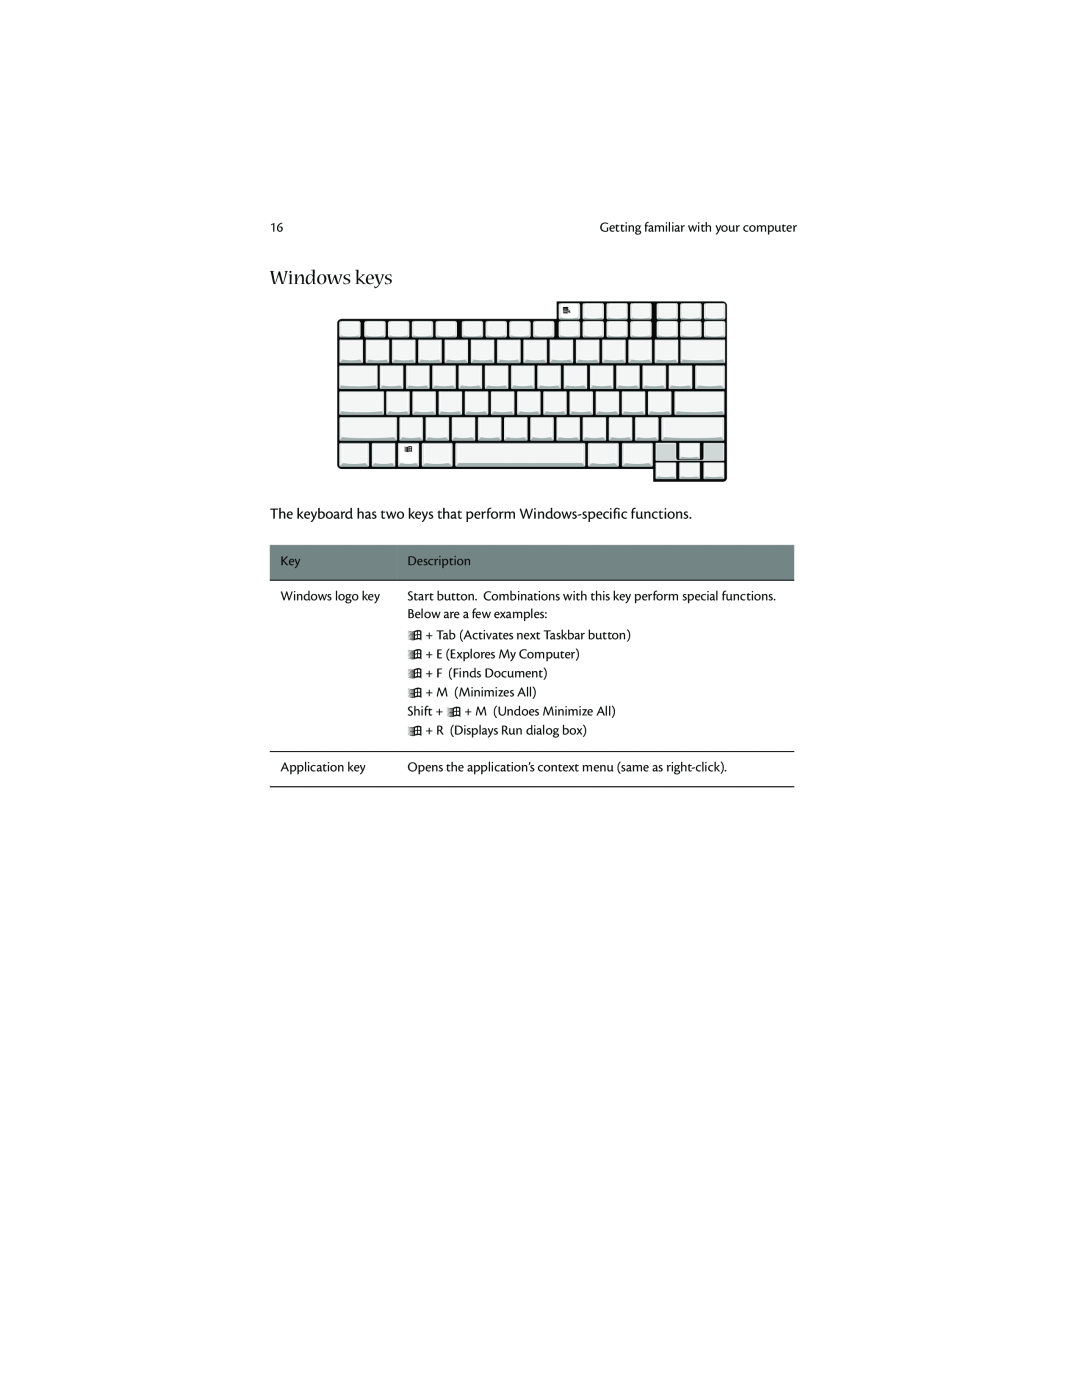 Acer 1400 manual Windows keys, The keyboard has two keys that perform Windows-specific functions 